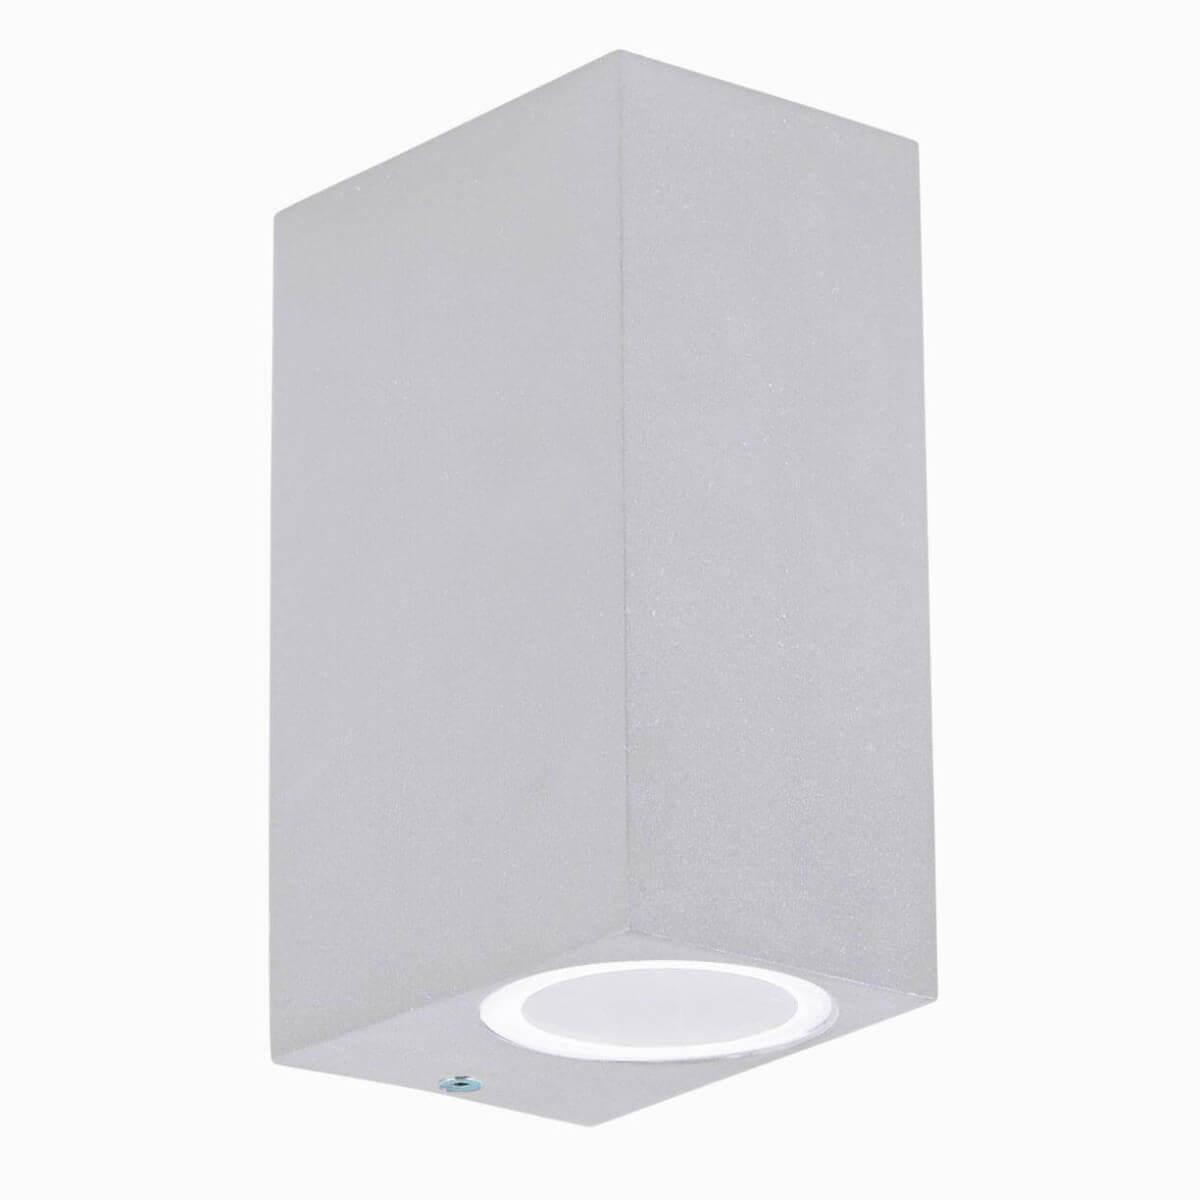    Ideal Lux Up AP2 Bianco 115320